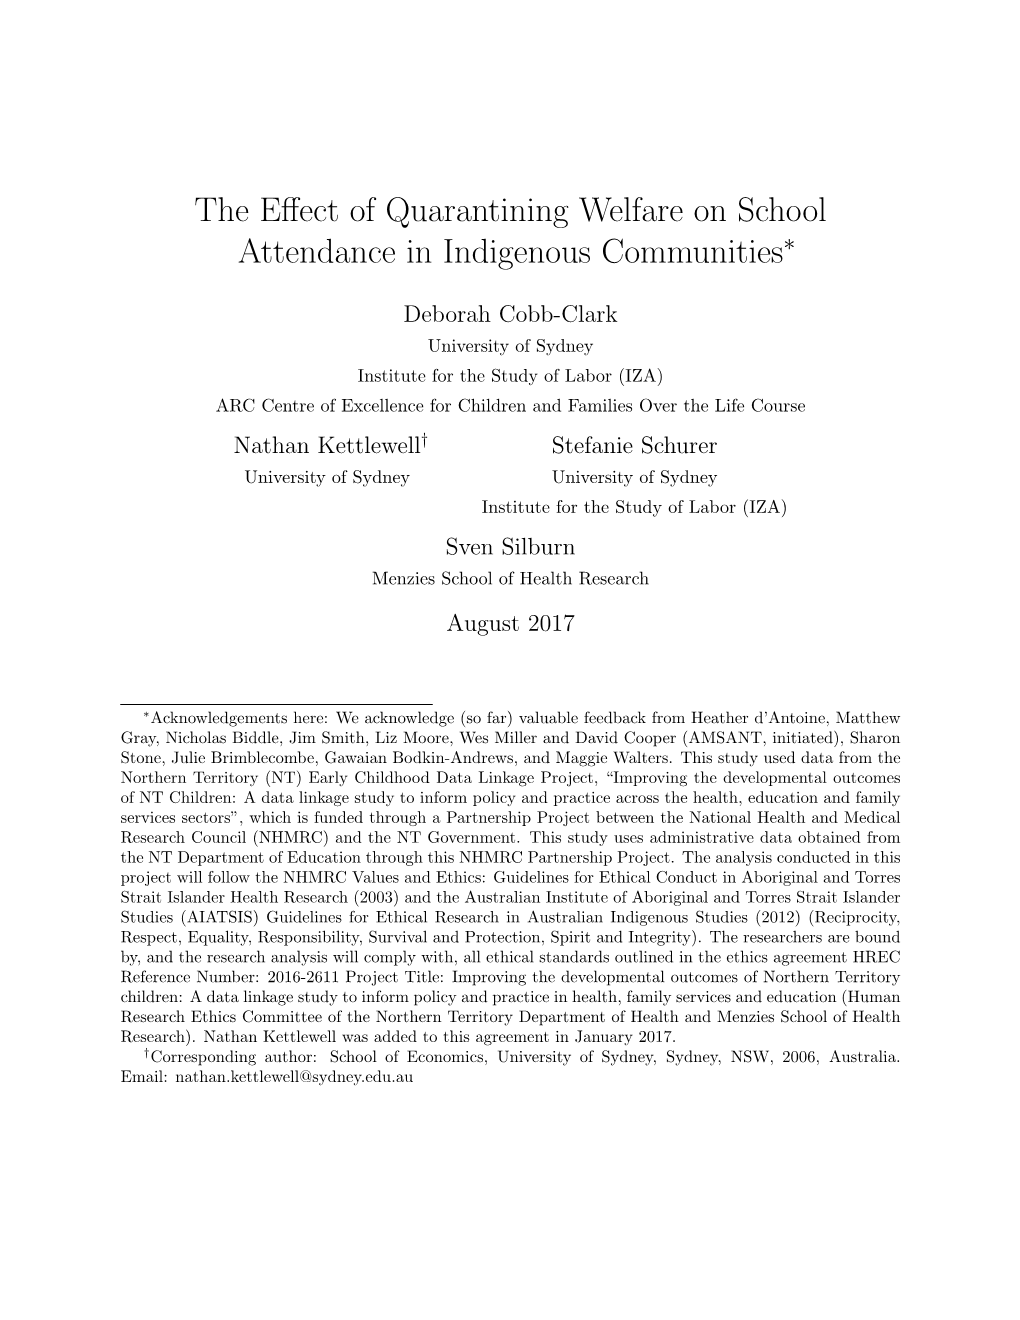 The Effect of Quarantining Welfare on School Attendance in Indigenous